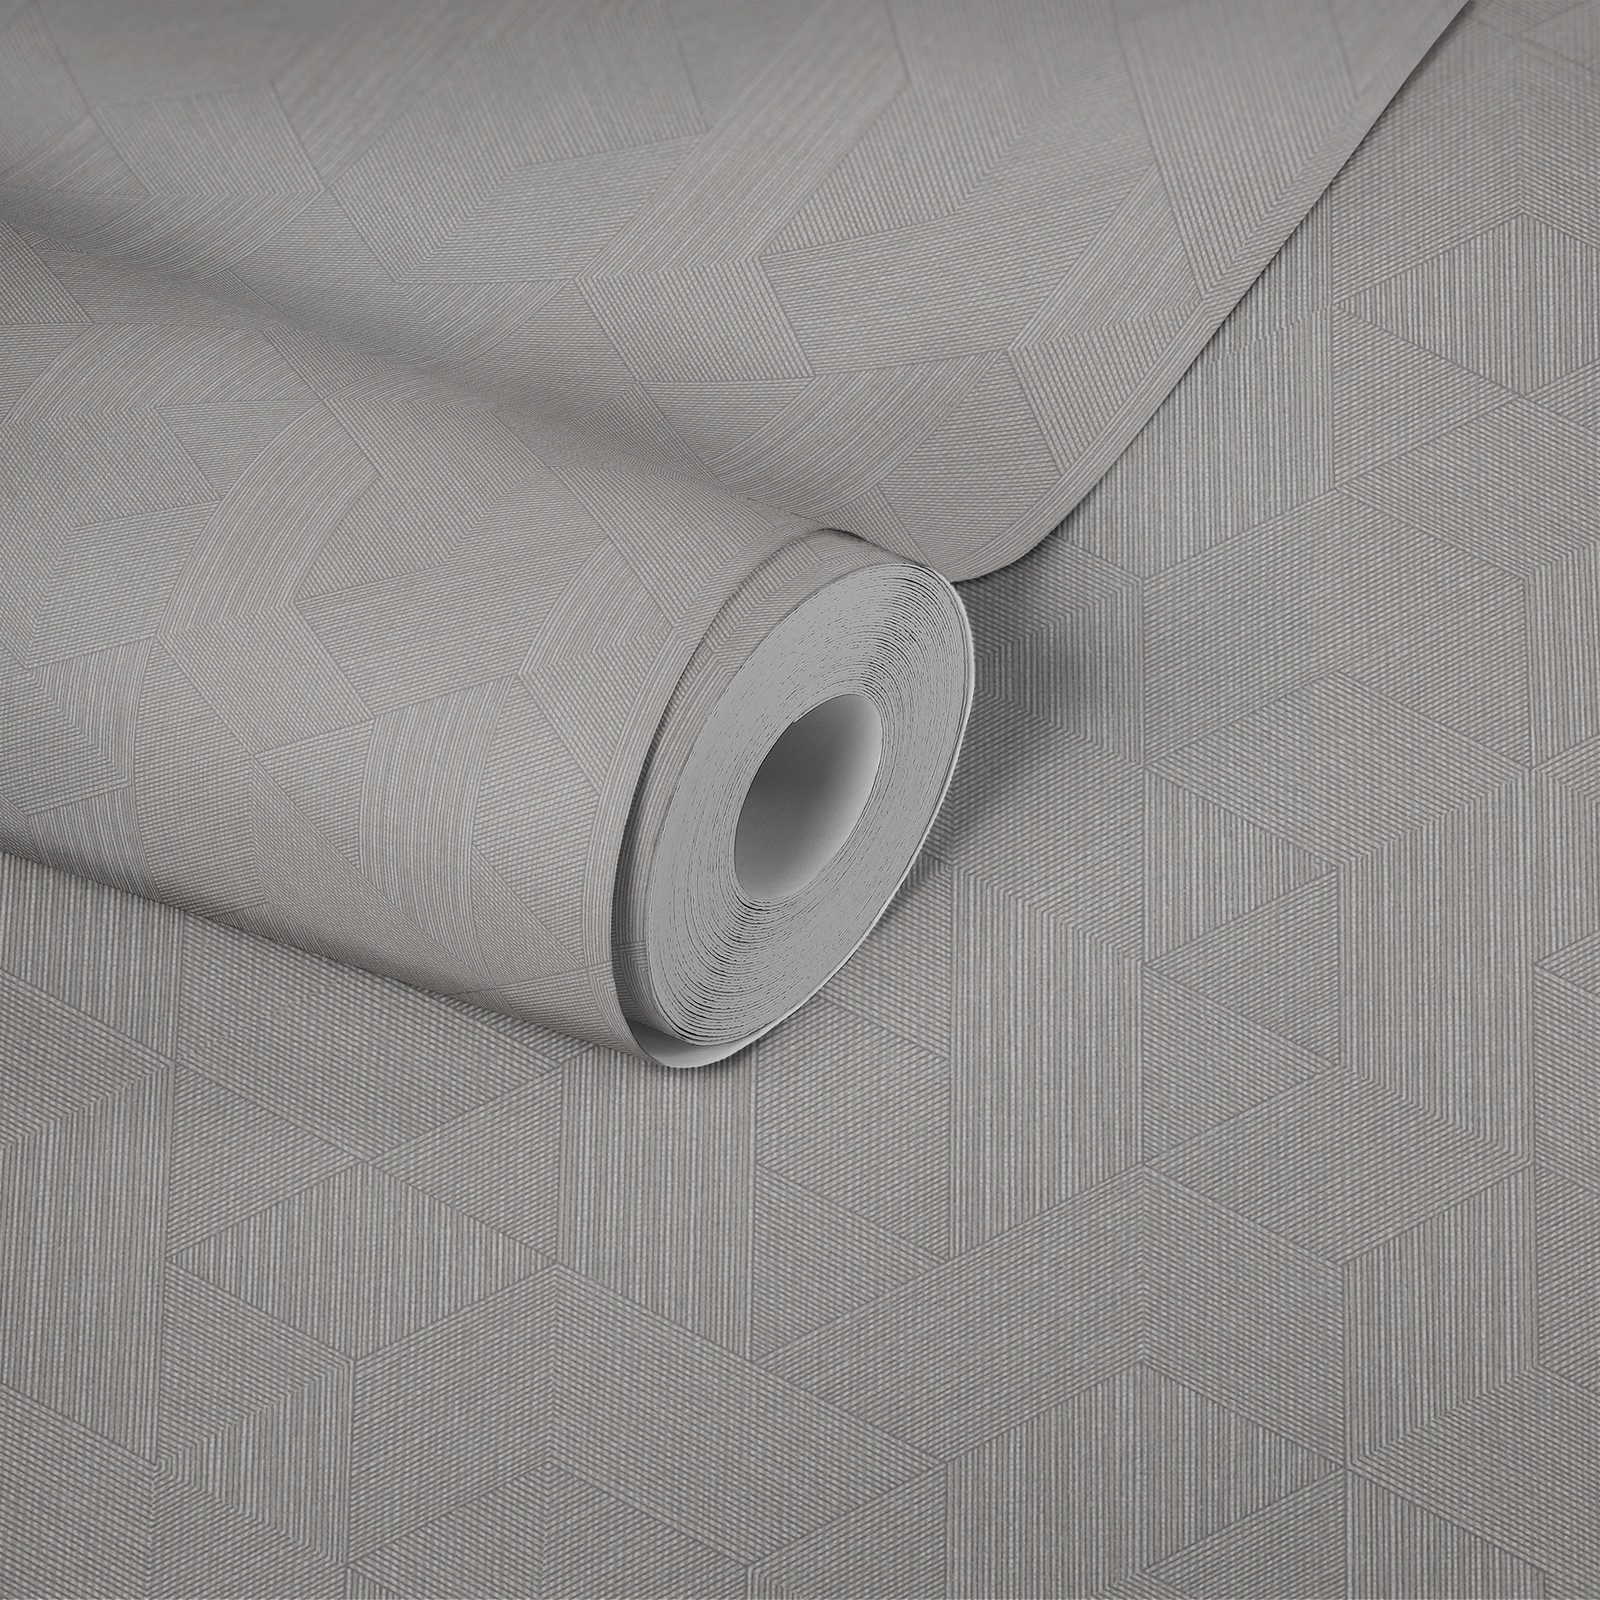             Wallpaper grey with graphic pattern & glossy effect - grey, brown
        